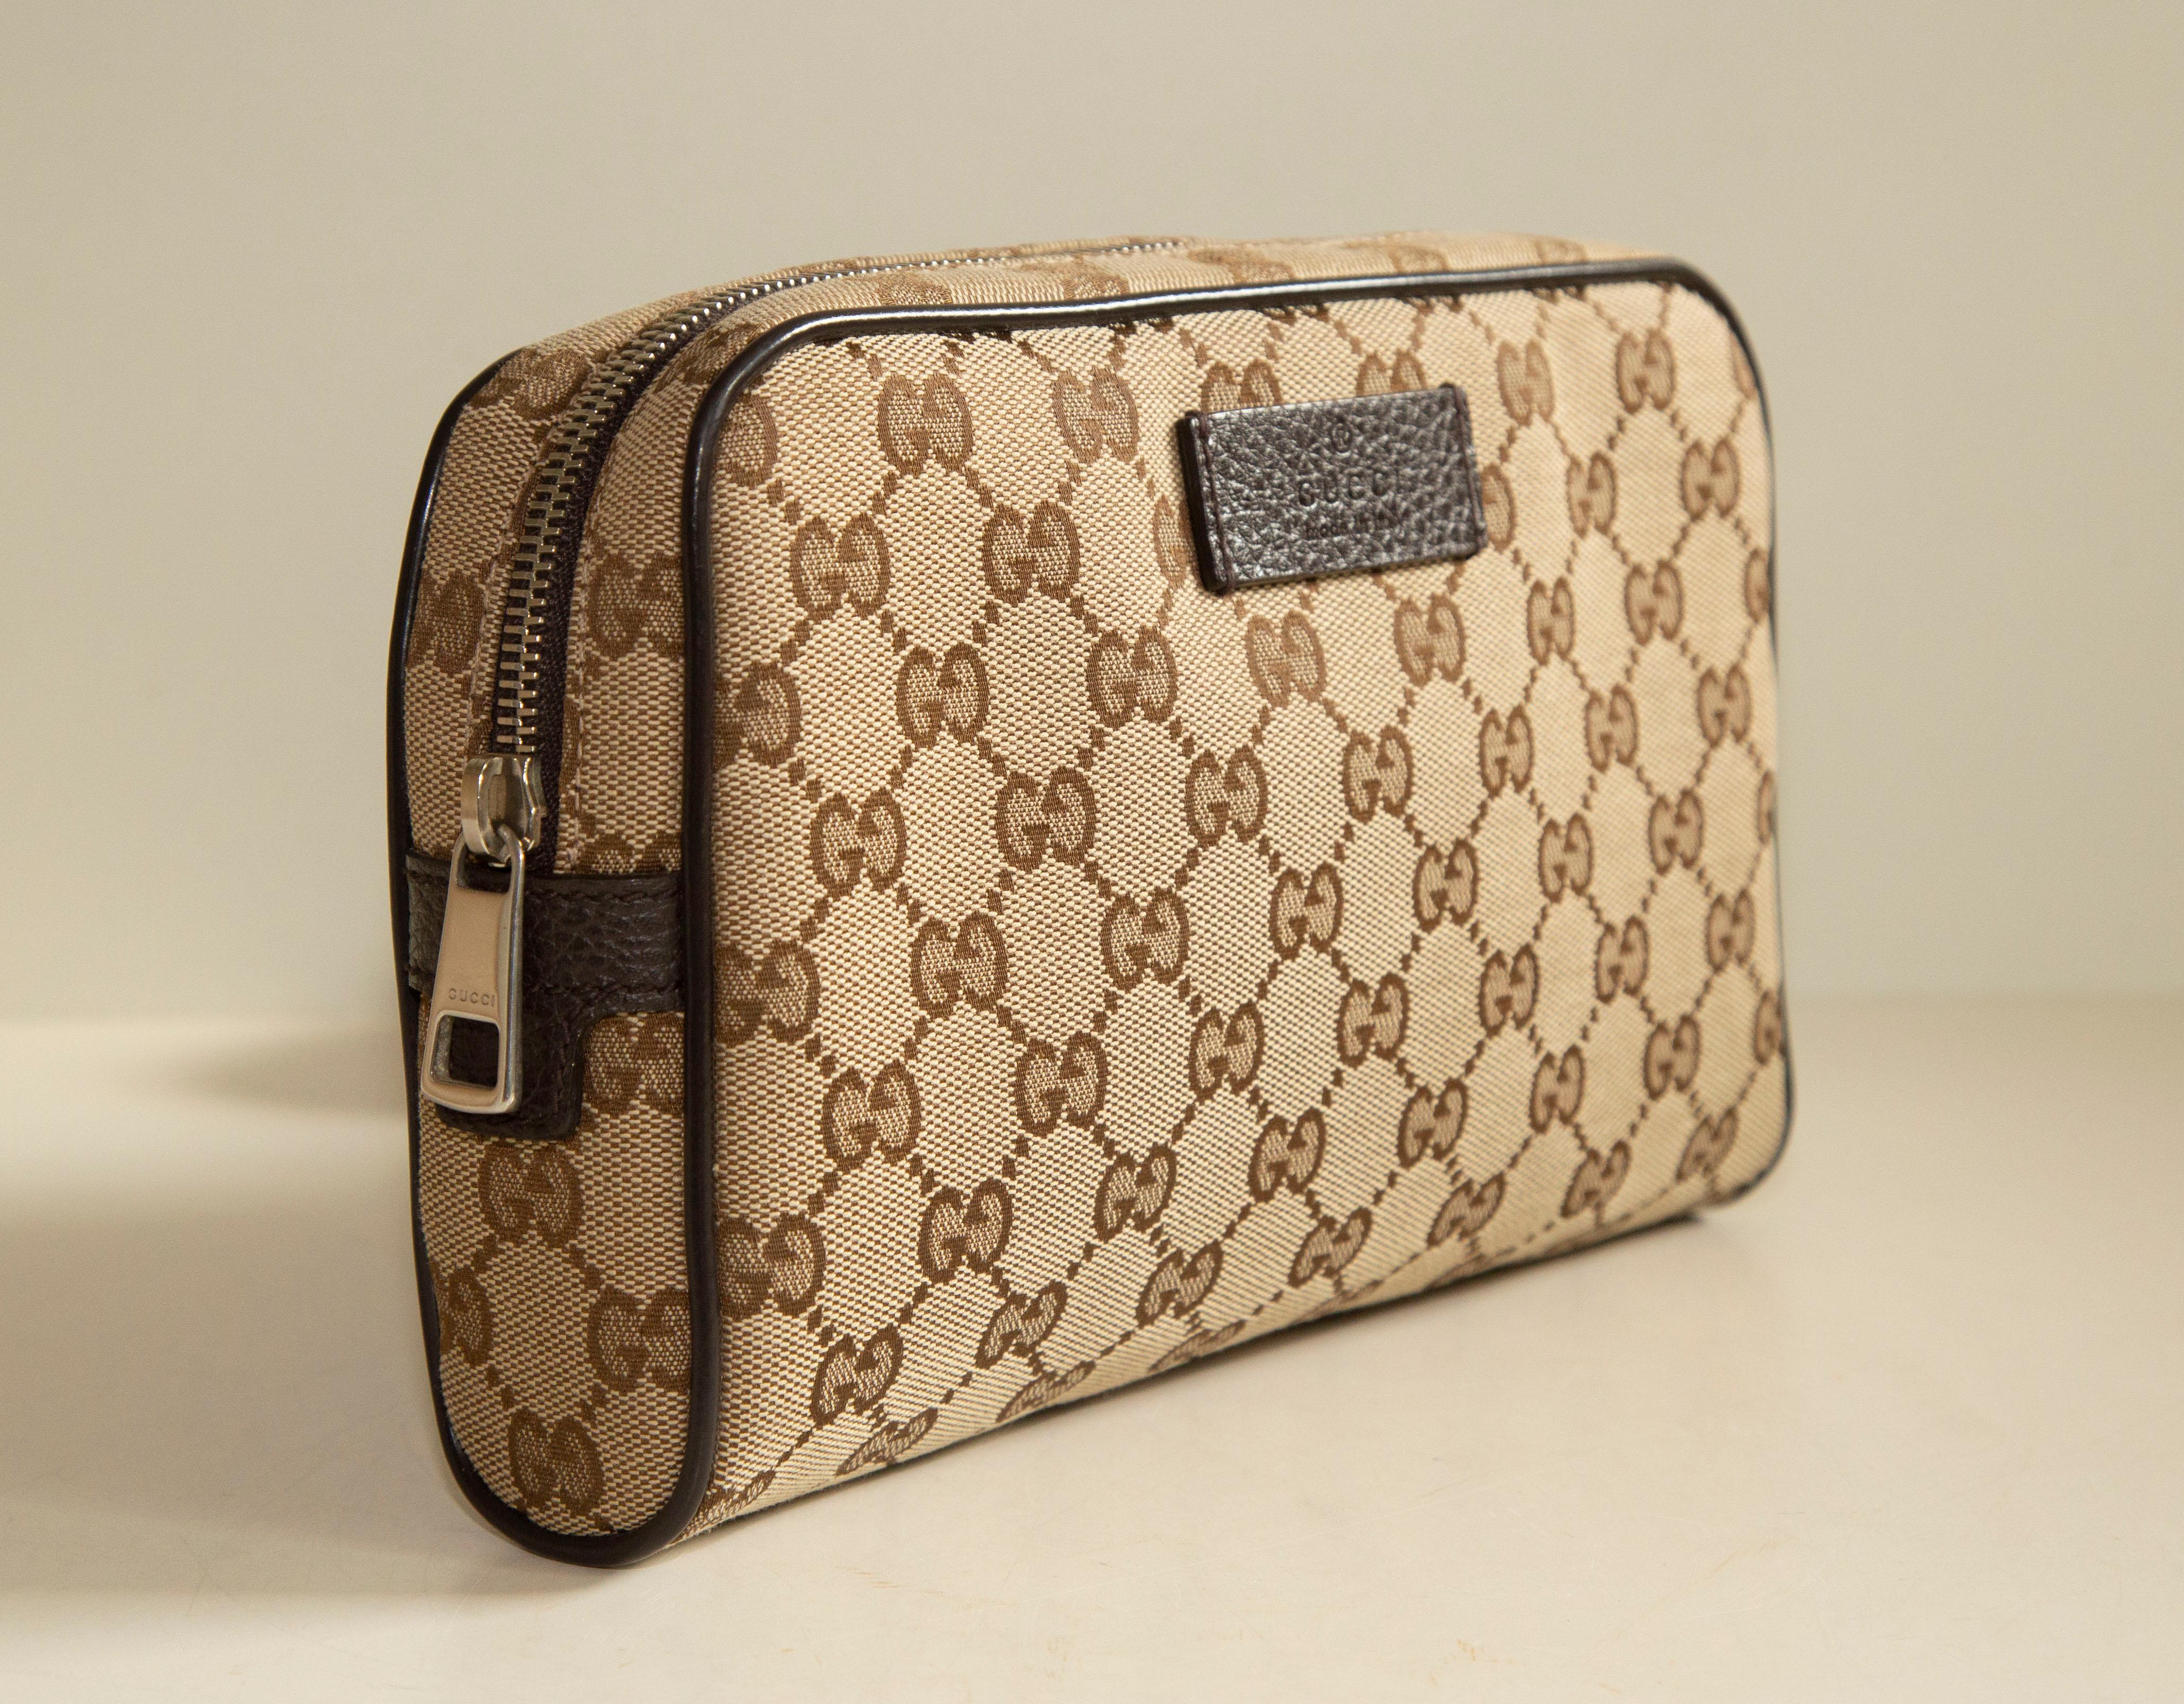 A Gucci belt bag made of classic brown and beige GG web canvas with brown leather trim. The interior is lined with brown fabric and next to the major compartment it features one side pocket. The hardware is silver toned. The canvas belt is